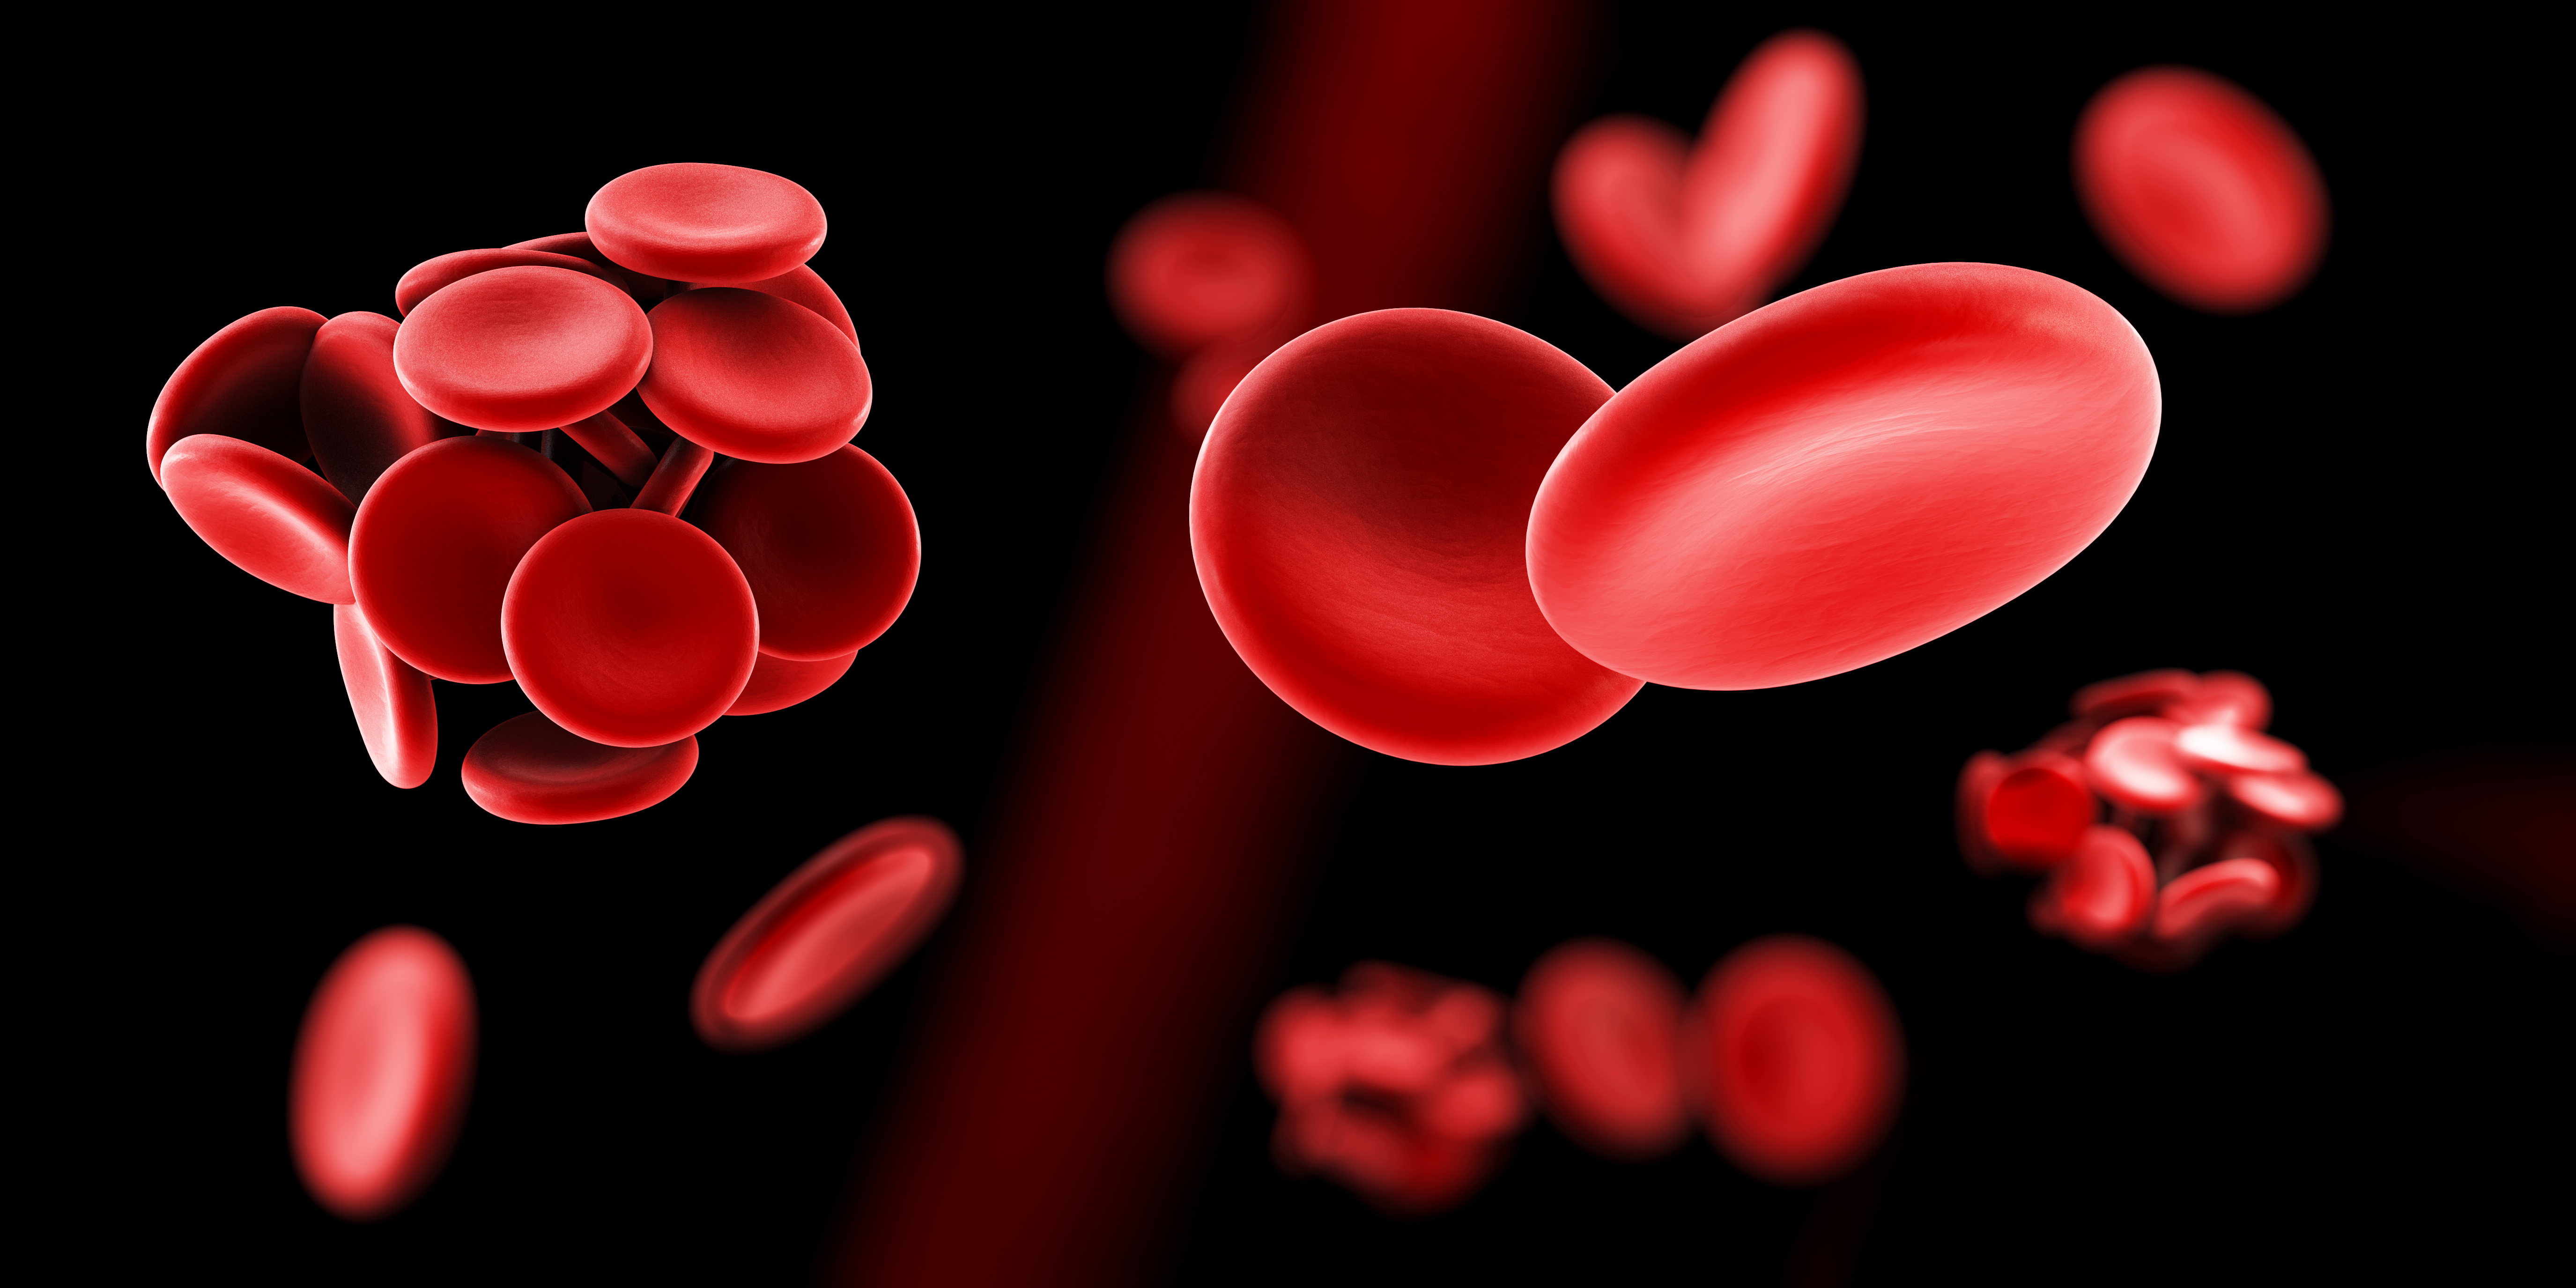 3D illustration of a blood clot and thrombosis